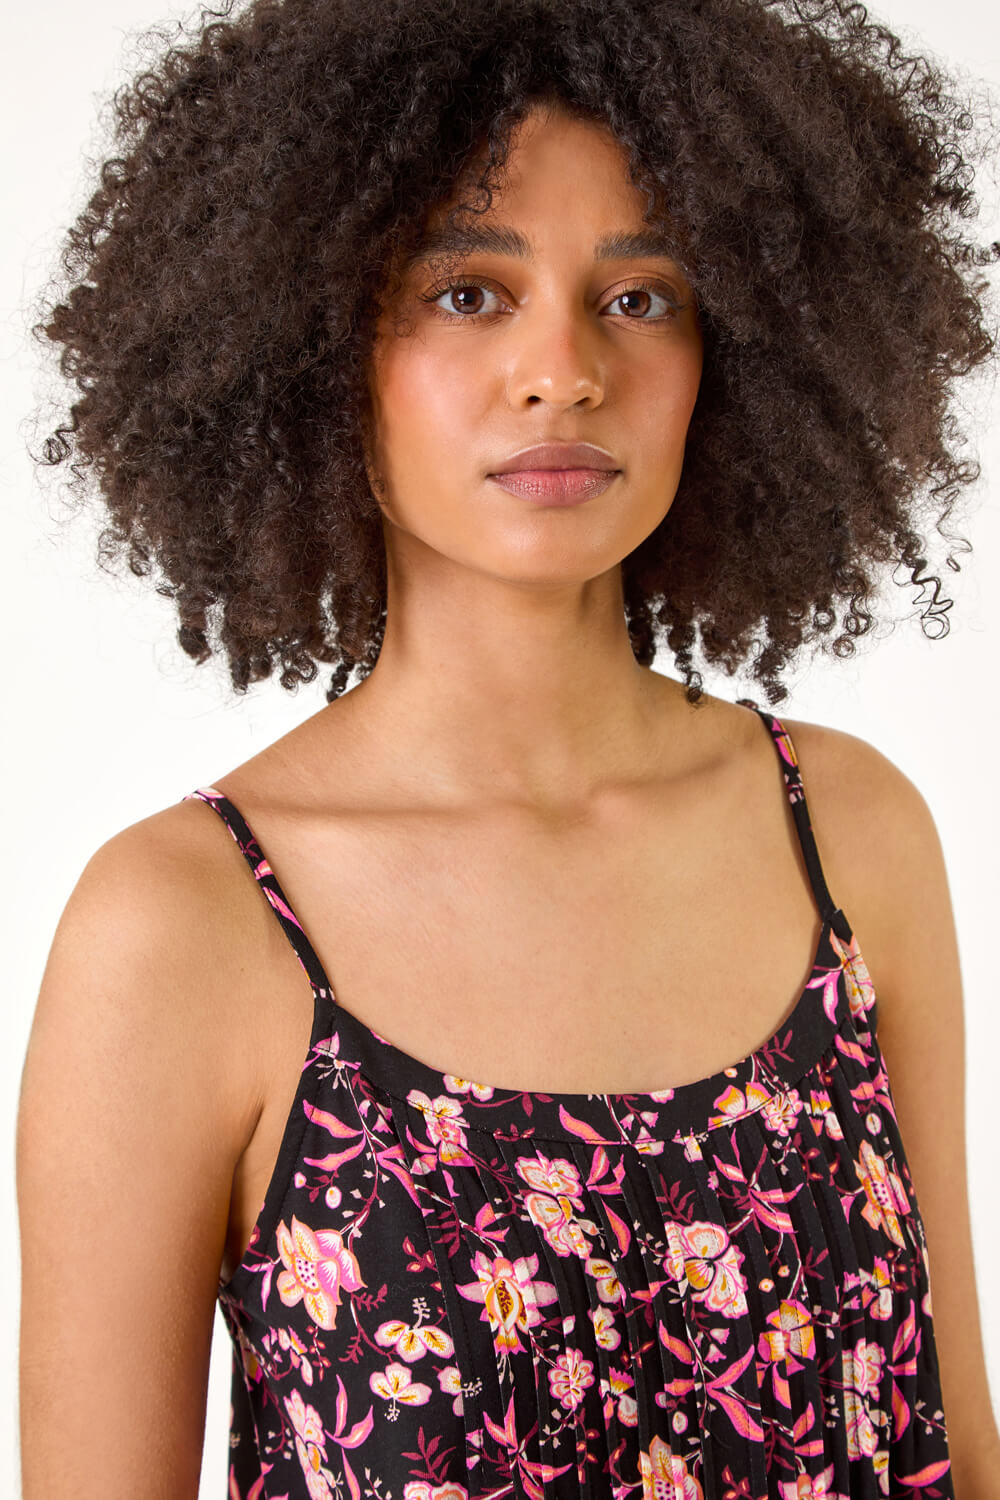 PINK Floral Print Pleat Front Cami Top, Image 3 of 5